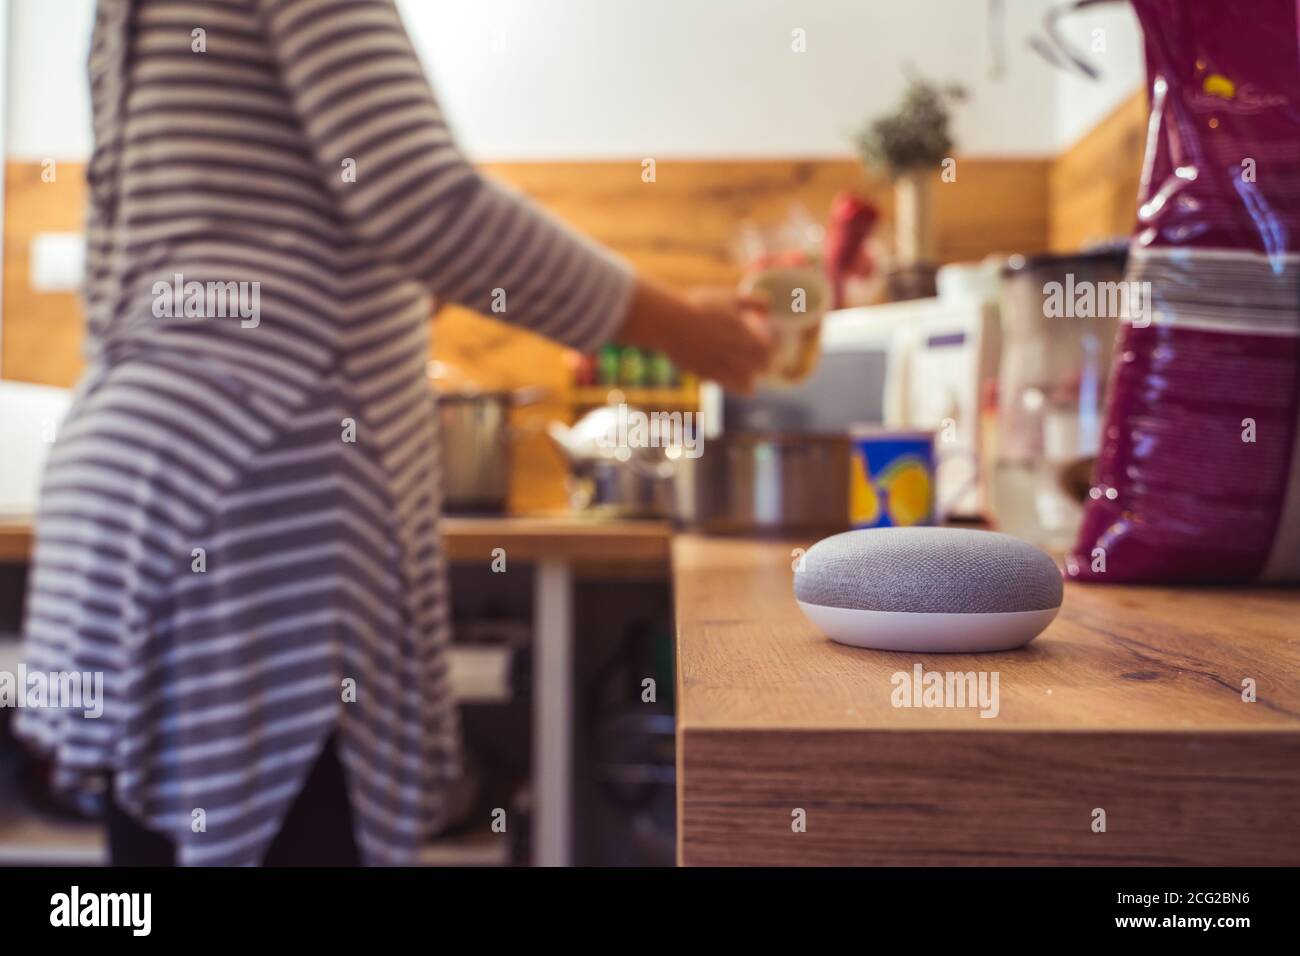 voice controlled smart speaker in a interior home voice controlled smart speaker in a interior home environment with a woman cooking in the background Stock Photo